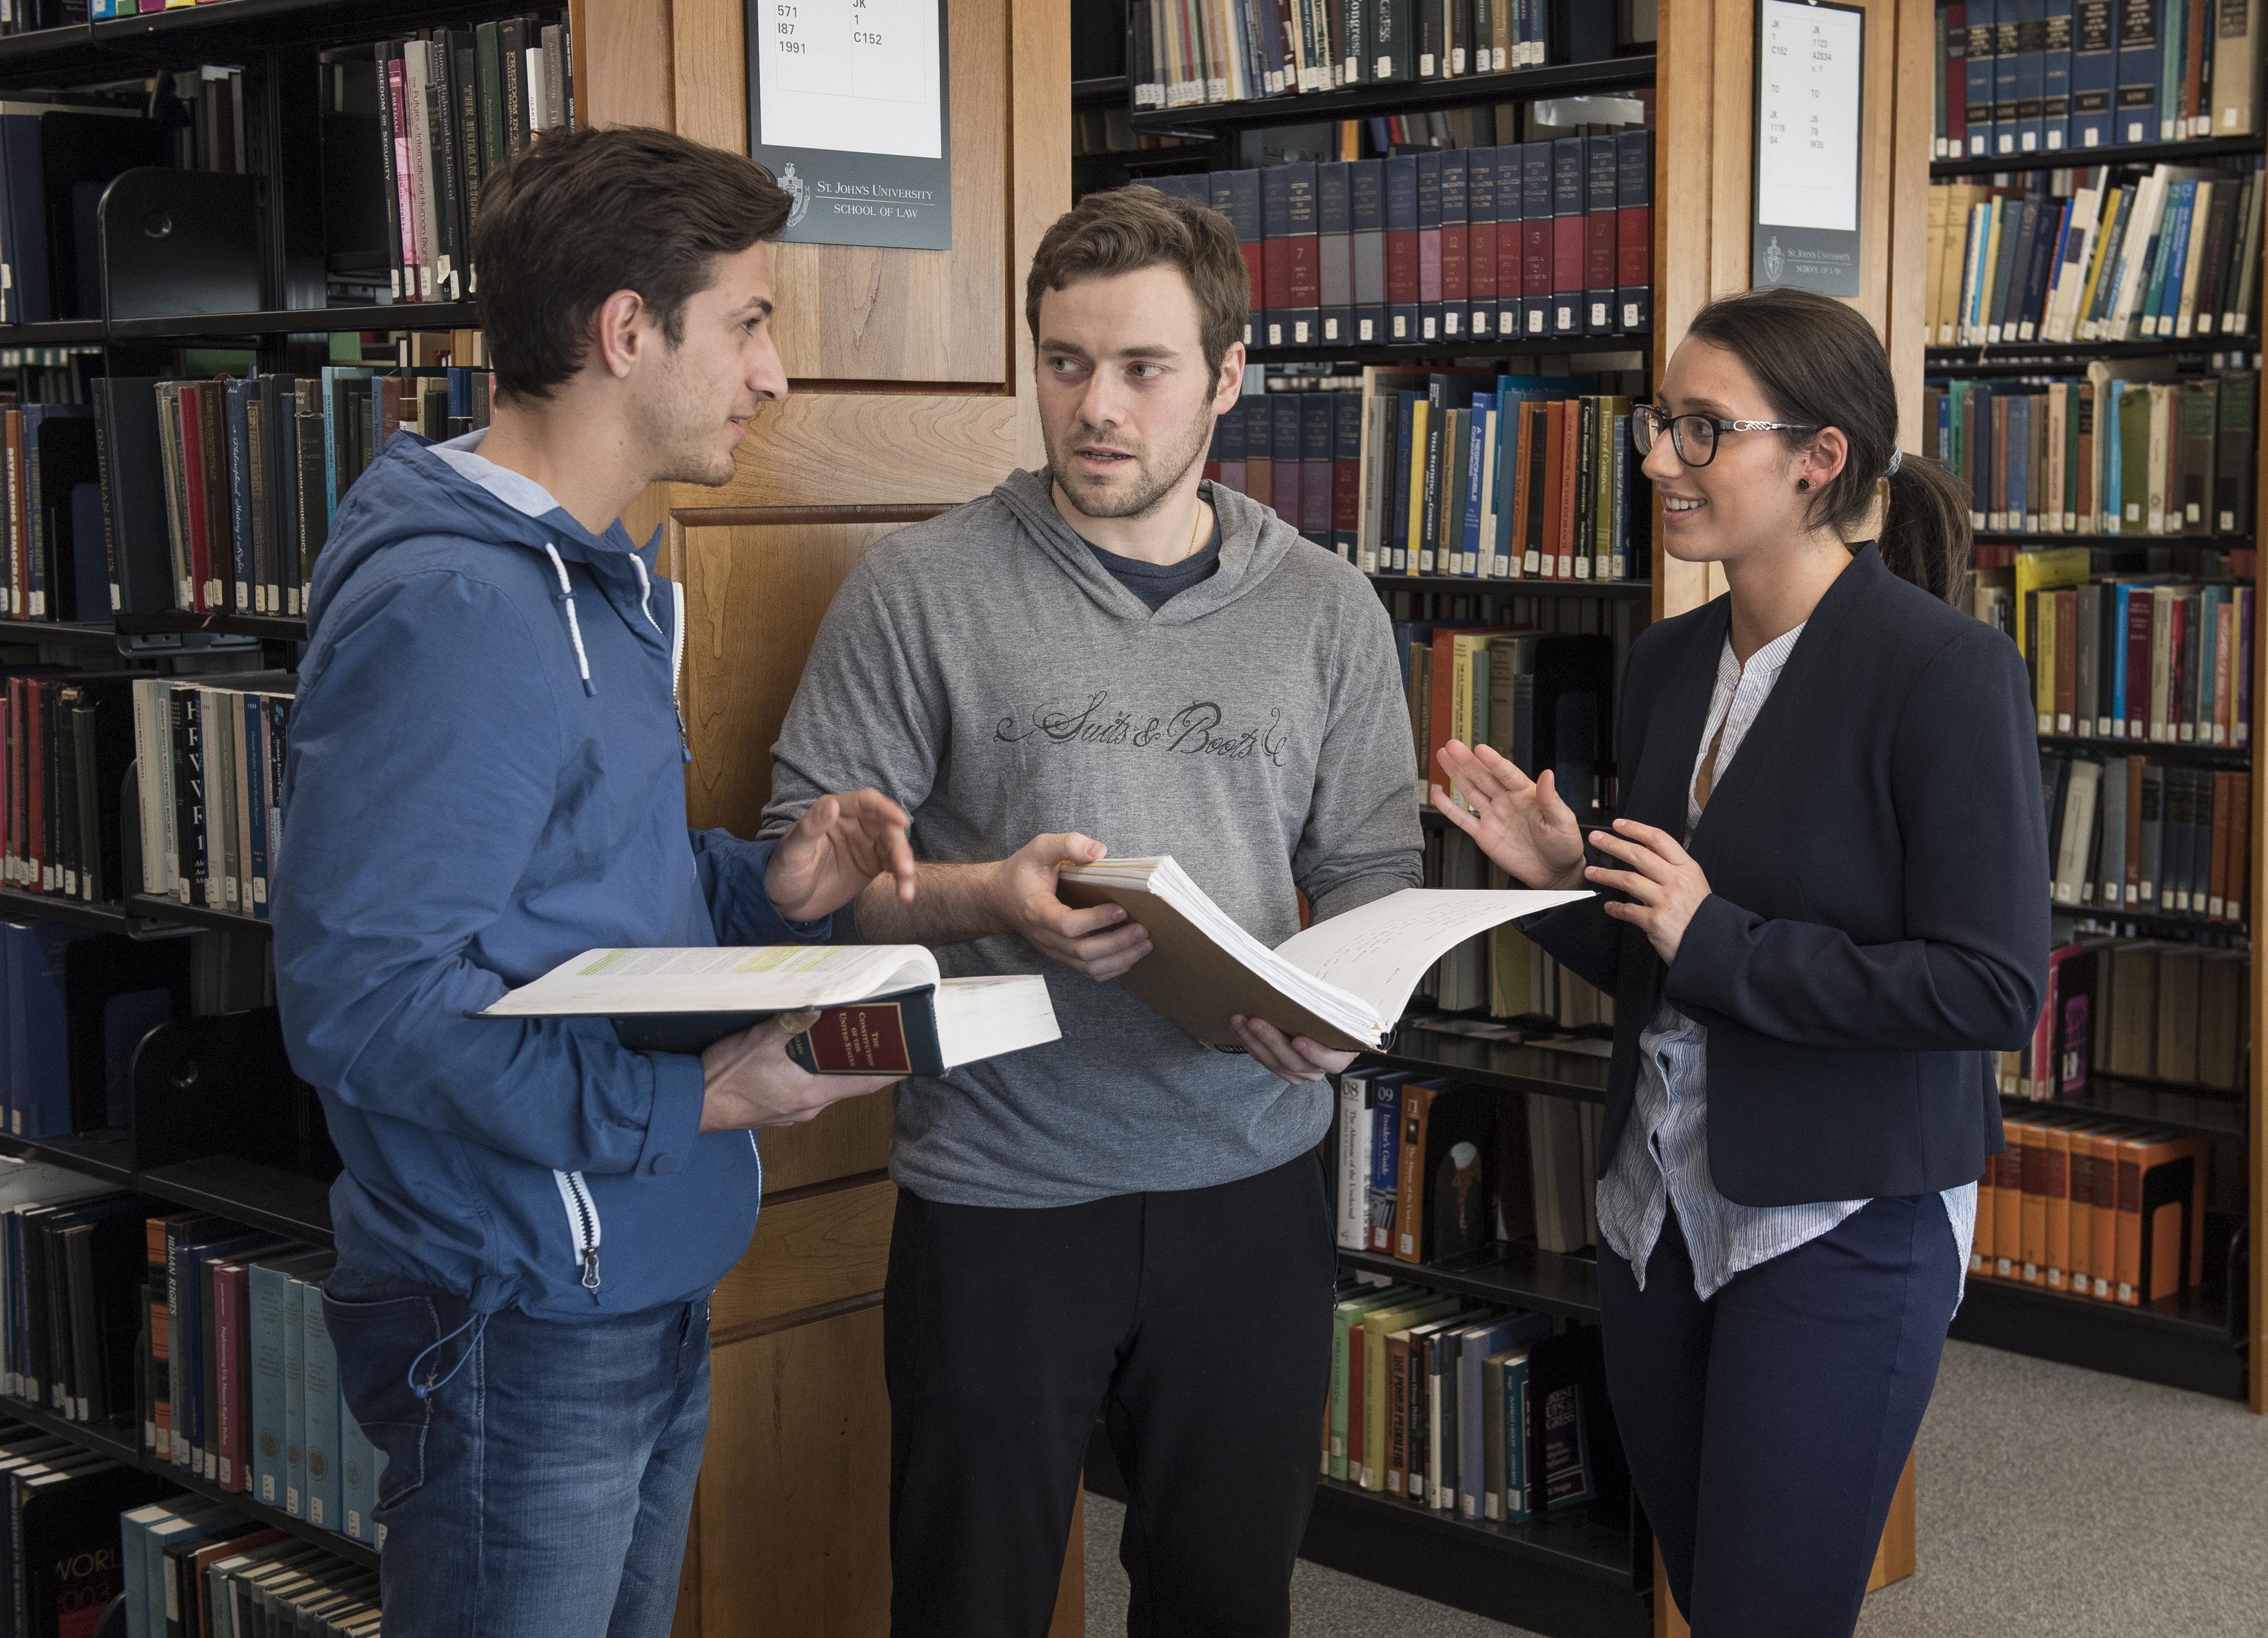 Three law students conversing in the library